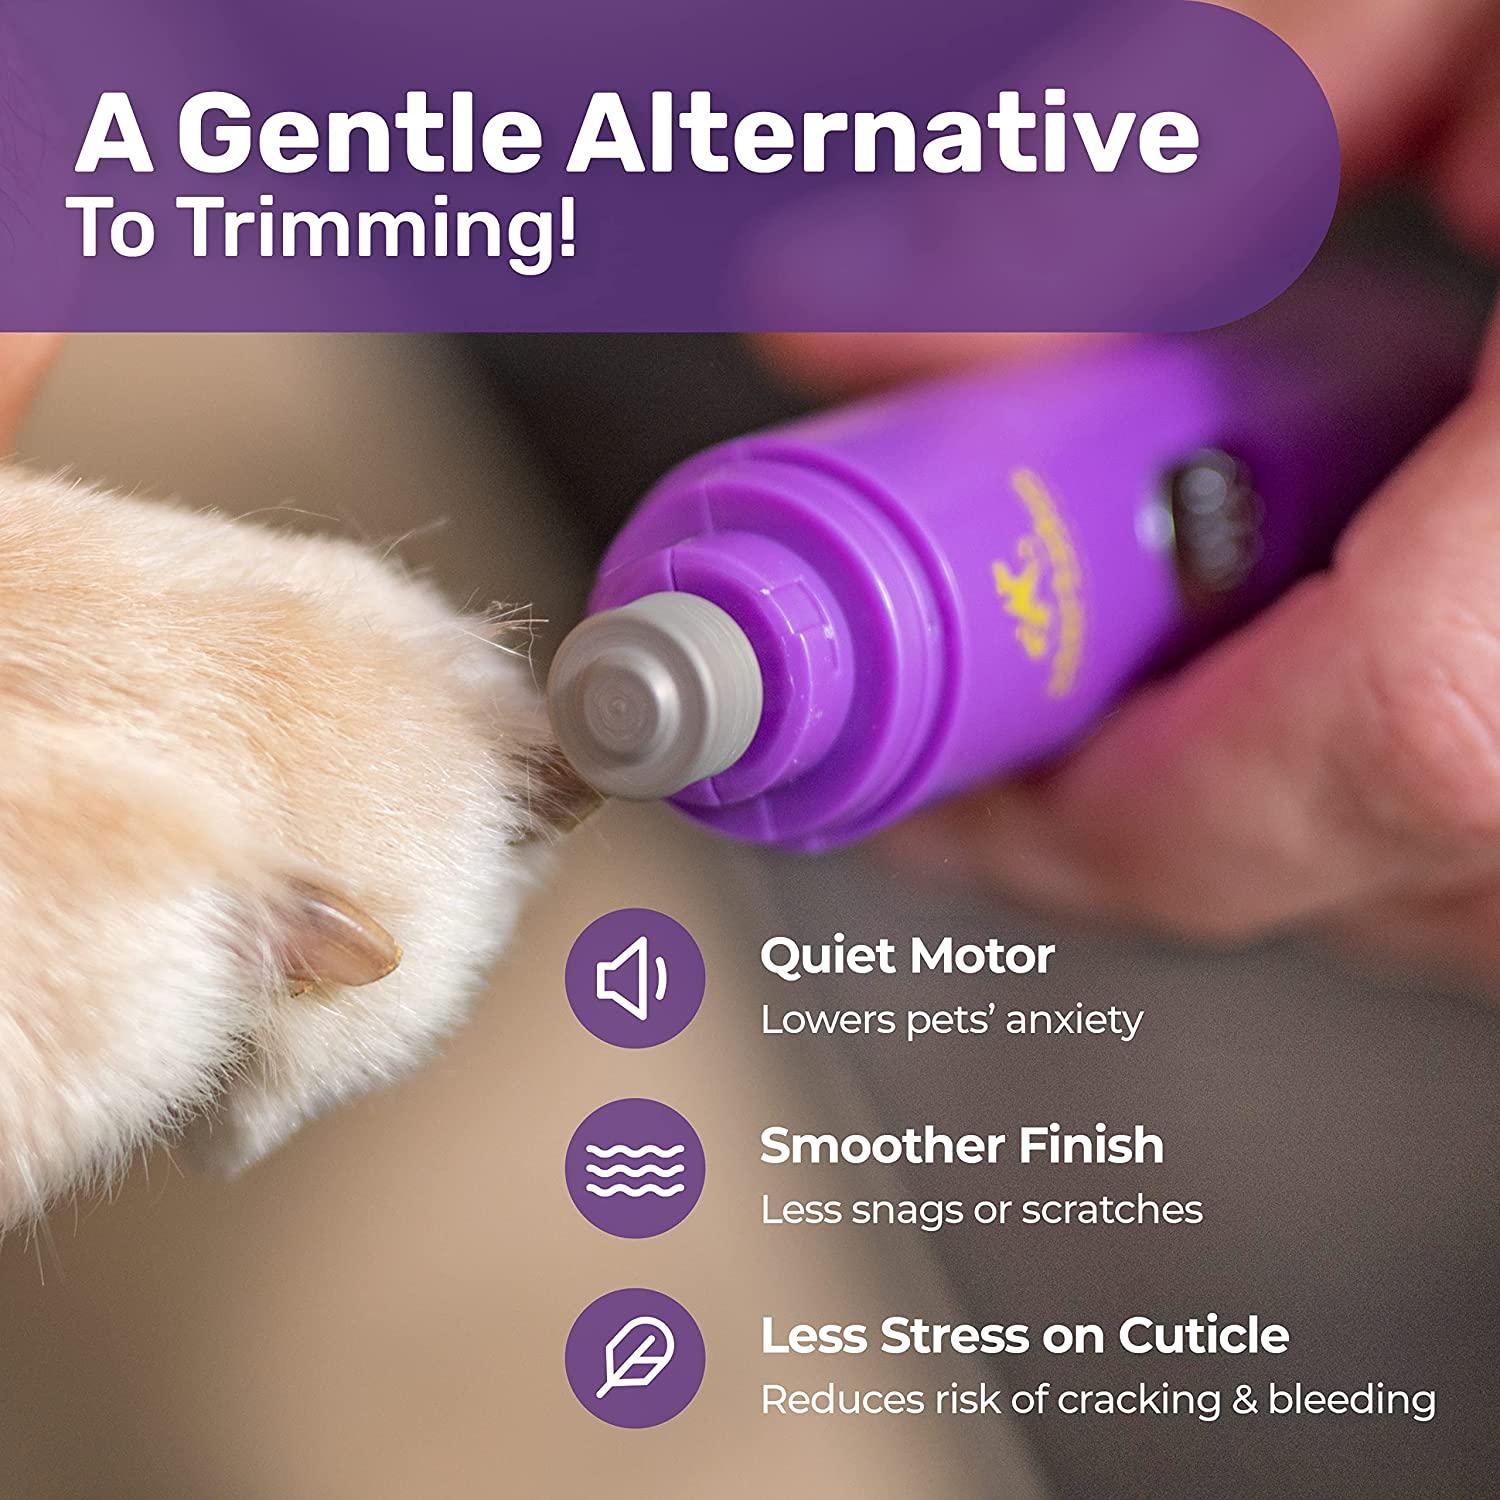 Dog Nail Grinder, Electric Premium Cat Nail Trimmer, Pets File Gentle Paws  Nail Grooming, Trimmer Clipper for Dogs, Cats, Hamsters, Rabbits and Birds,  Suitable for Medium and Small Pets : Amazon.ca: Pet